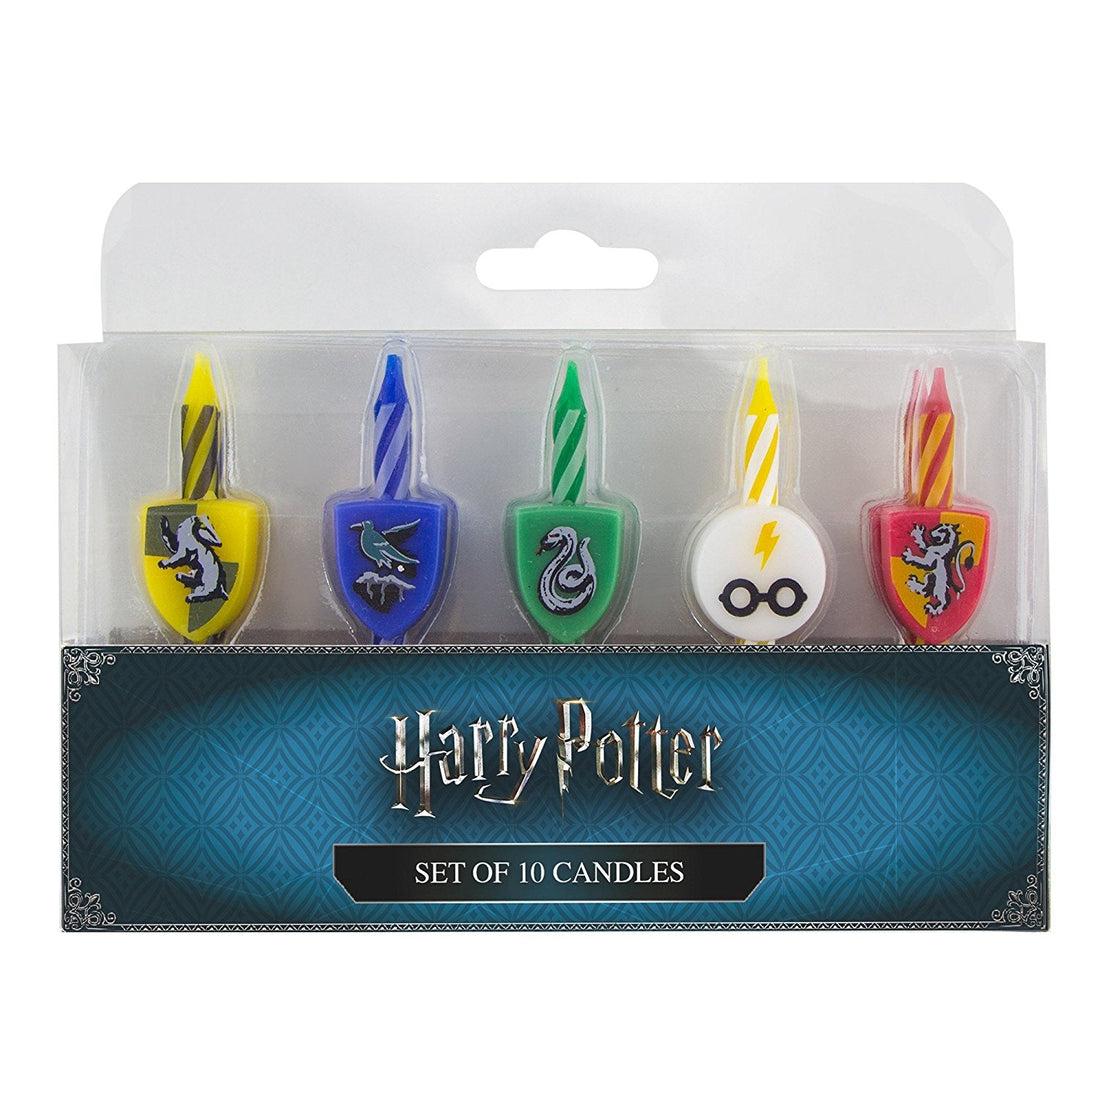 Harry Potter - Set of 10 Candles